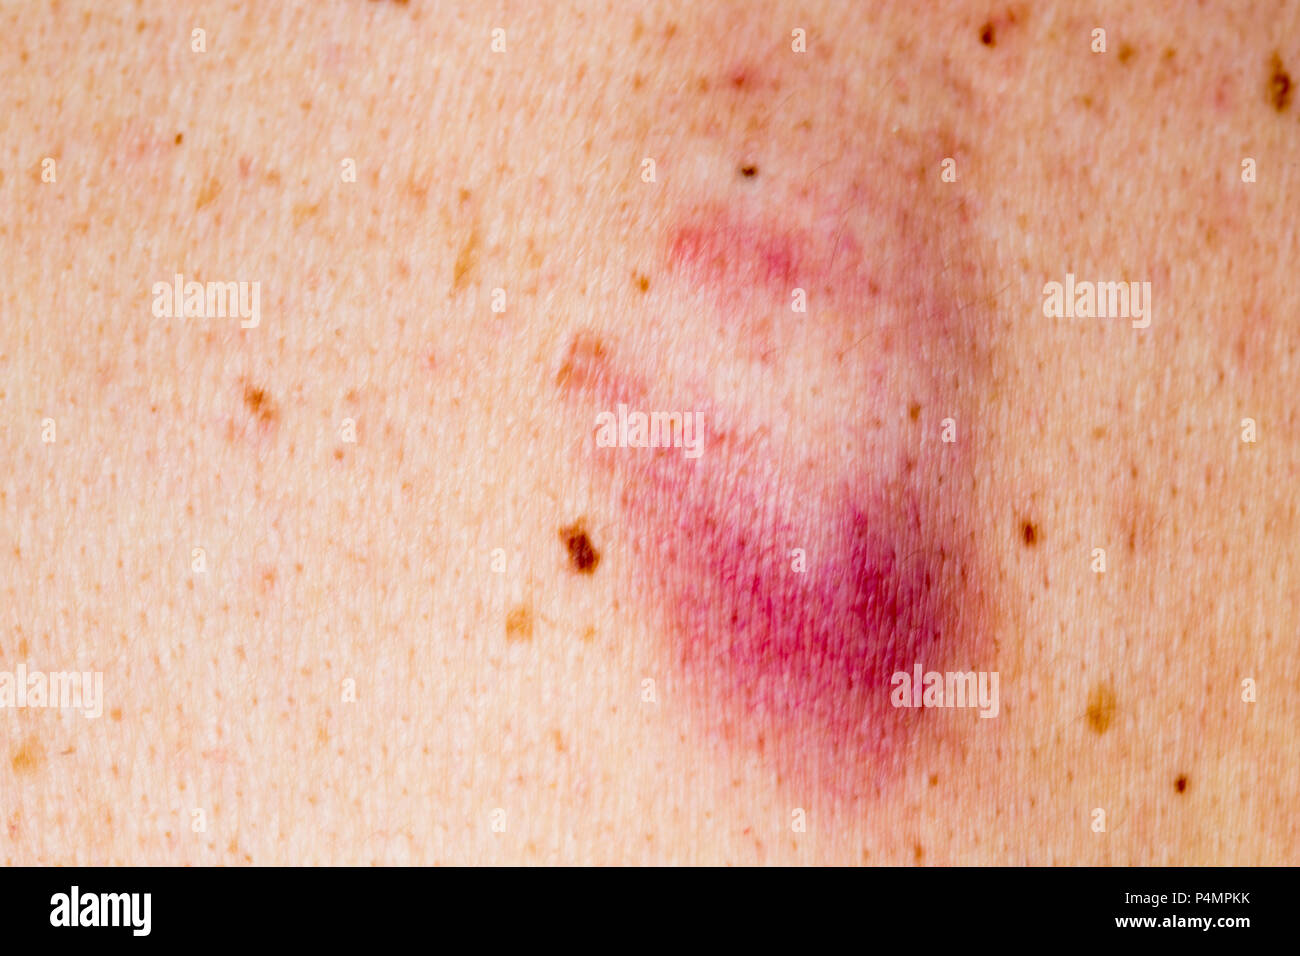 Detail of the bare skin on man in the back, Disorders of body with moles on skin growths include warts lot of wart, mole, birthmark, wart, gnarl, wart Stock Photo